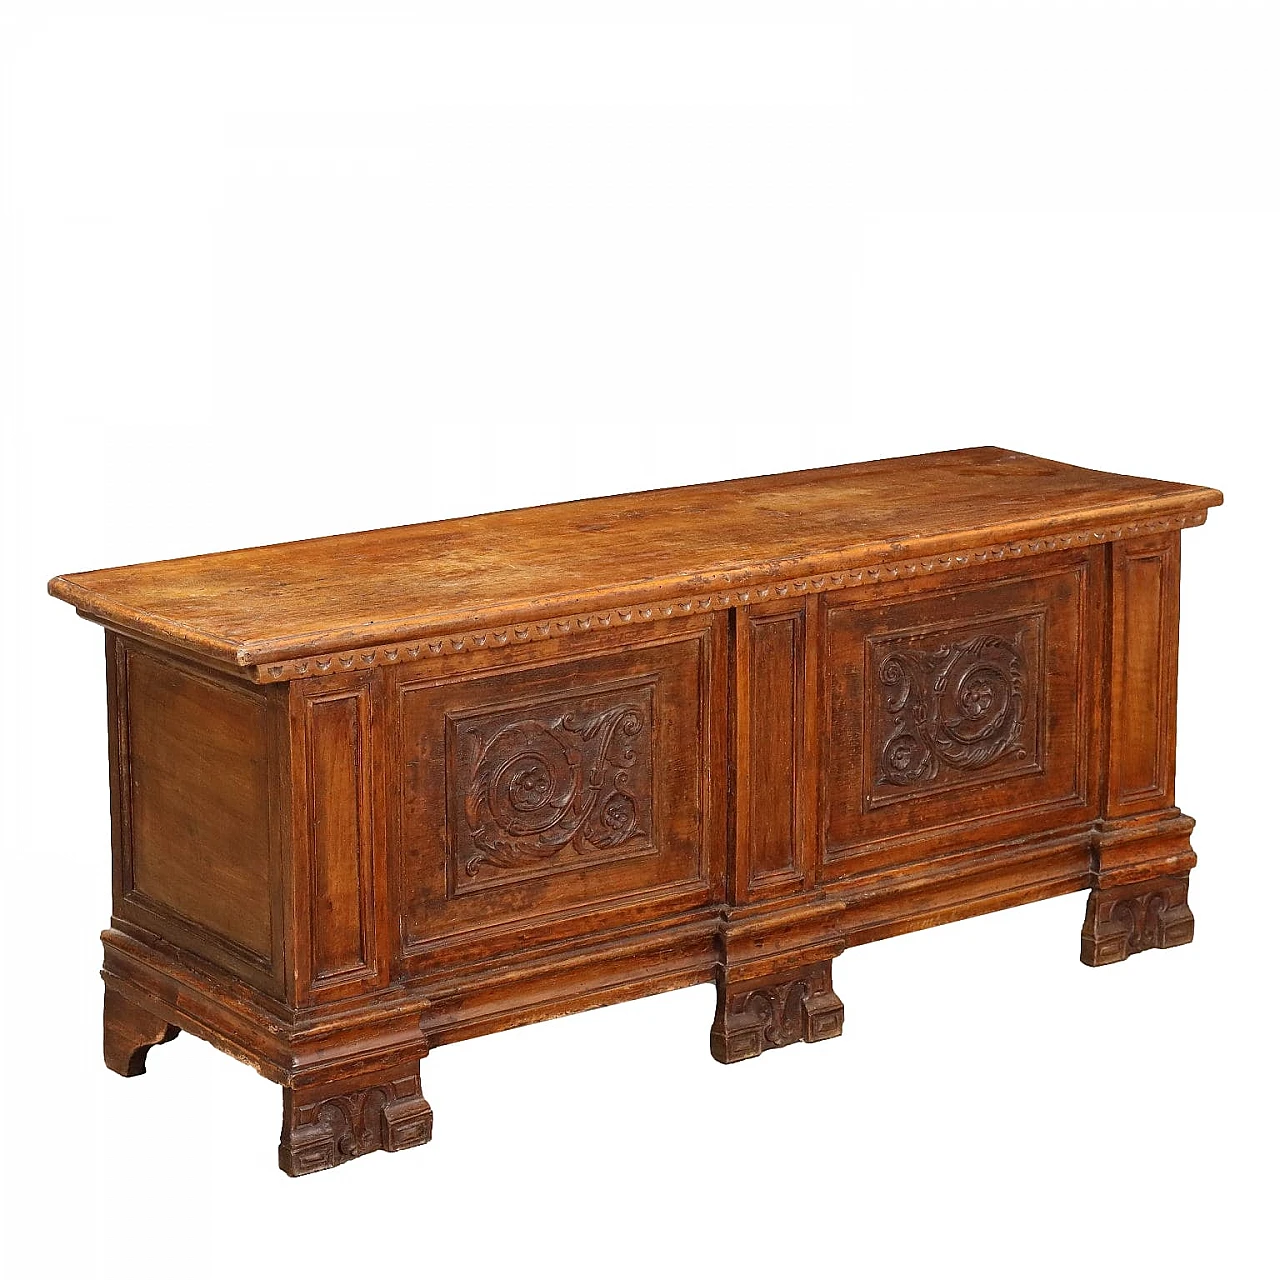 Walnut chest carved with phytomorphic motifs, 18th century 1